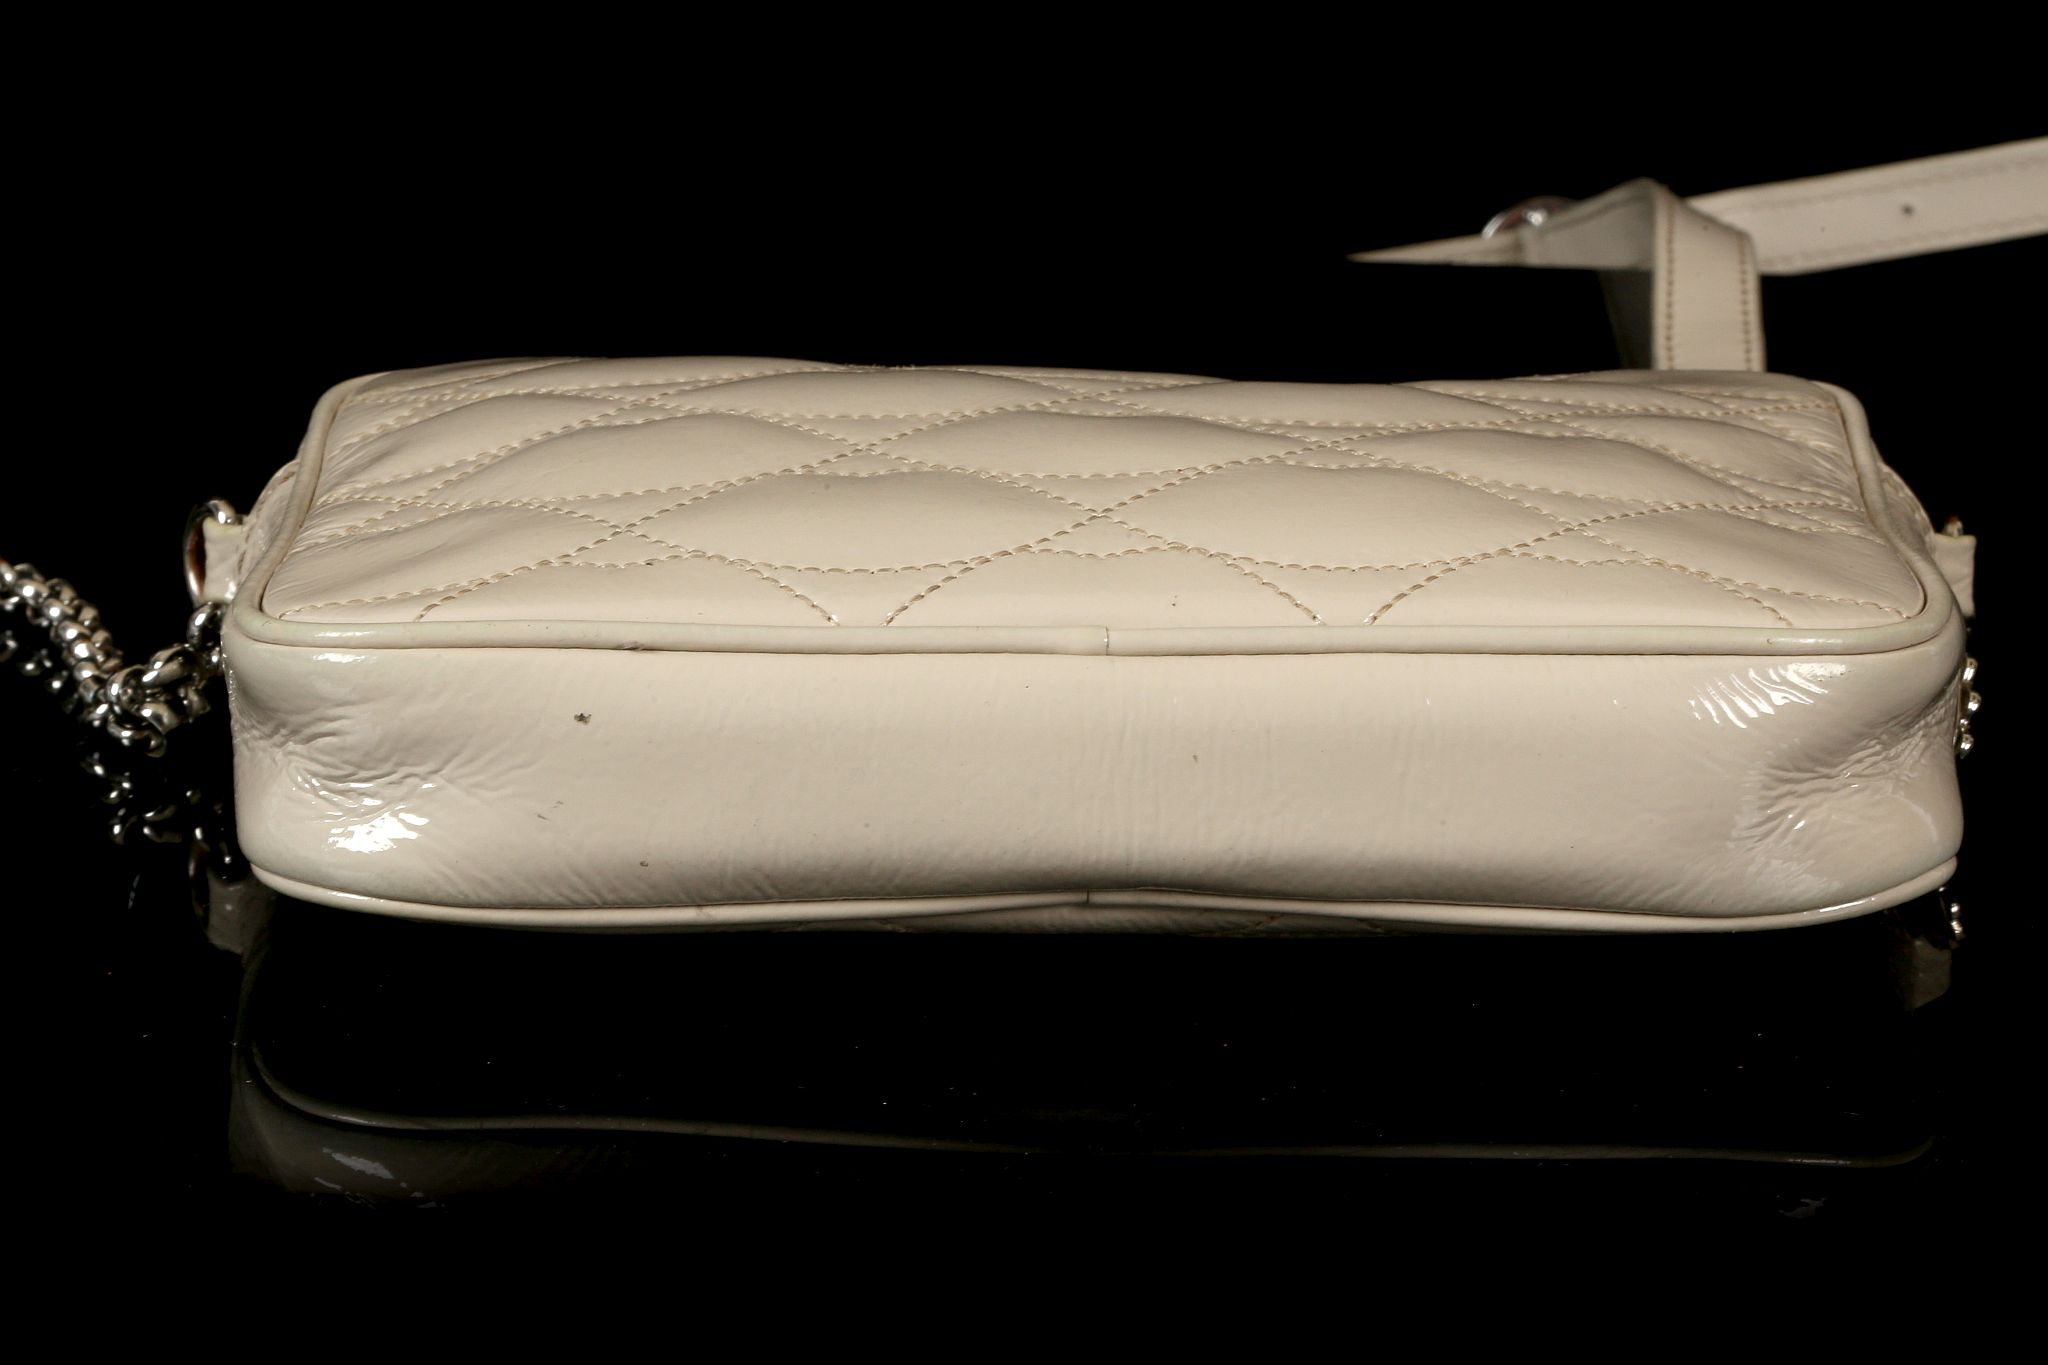 LULU GUINNESS LIPS HANDBAG, beige patent leather with stitched lips pattern, silver tone hardware, - Image 7 of 12